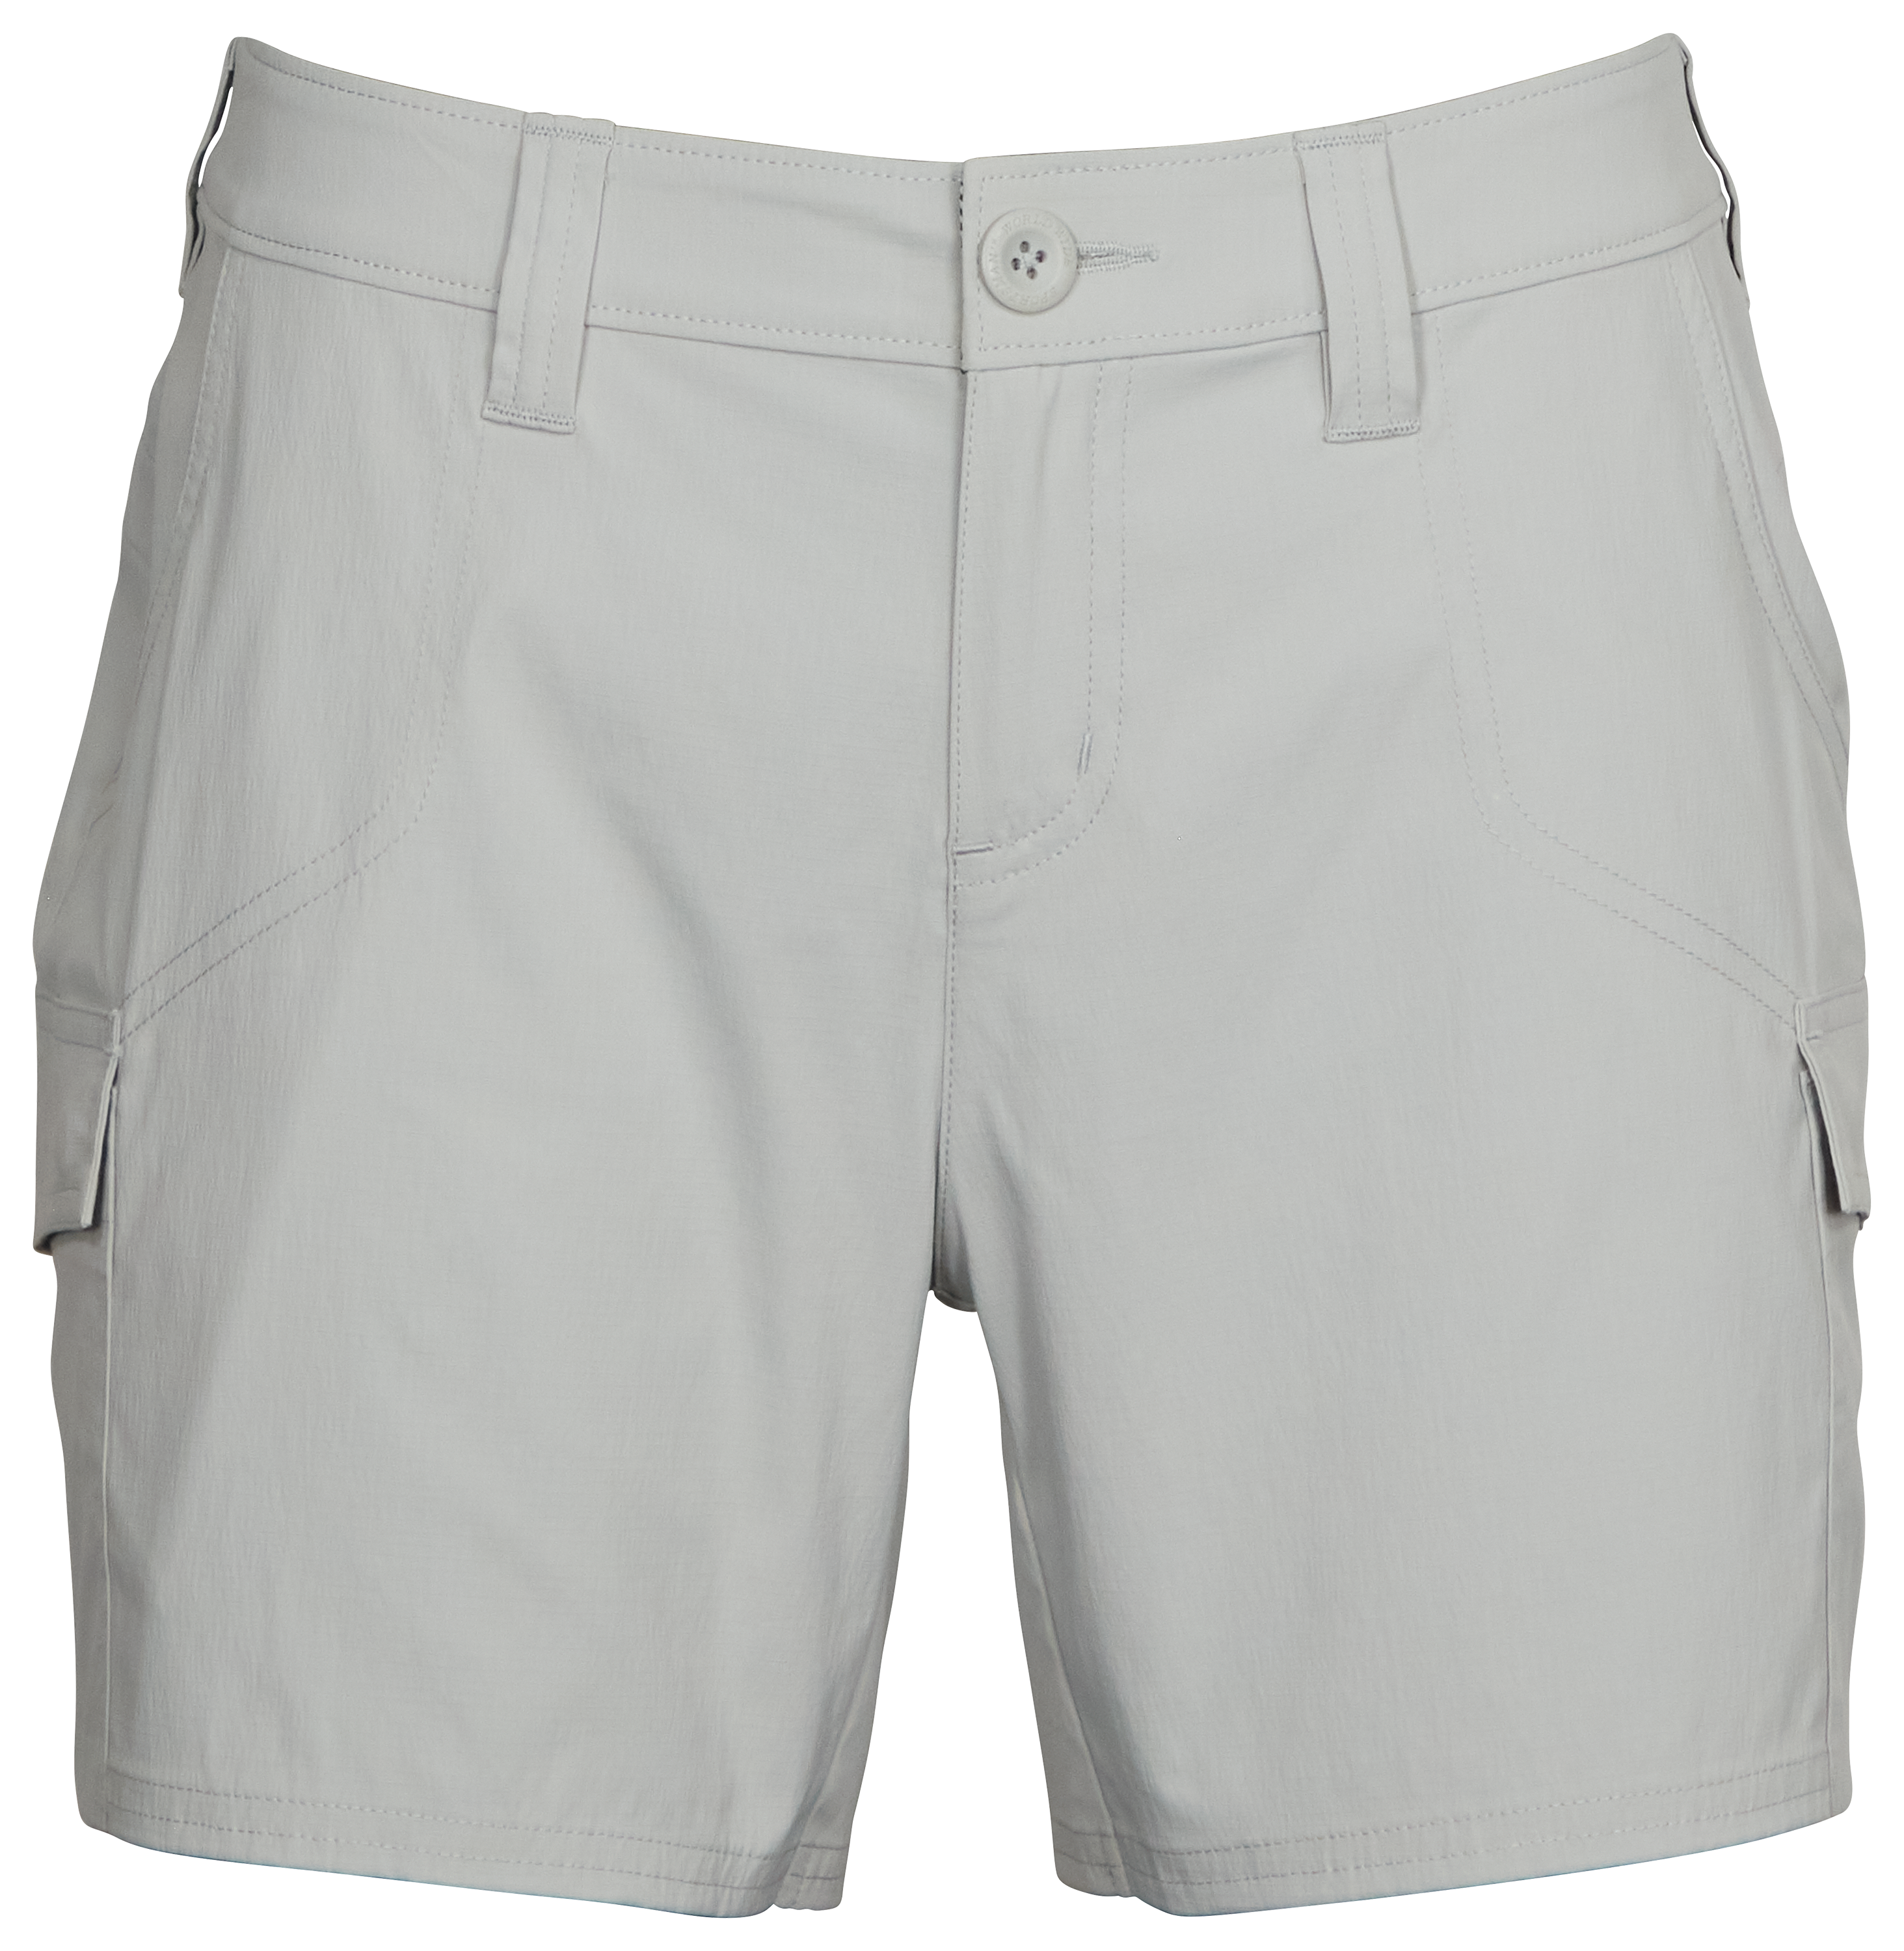 World Wide Sportsman Ripstop Cargo Shorts for Ladies - High Rise - 20W